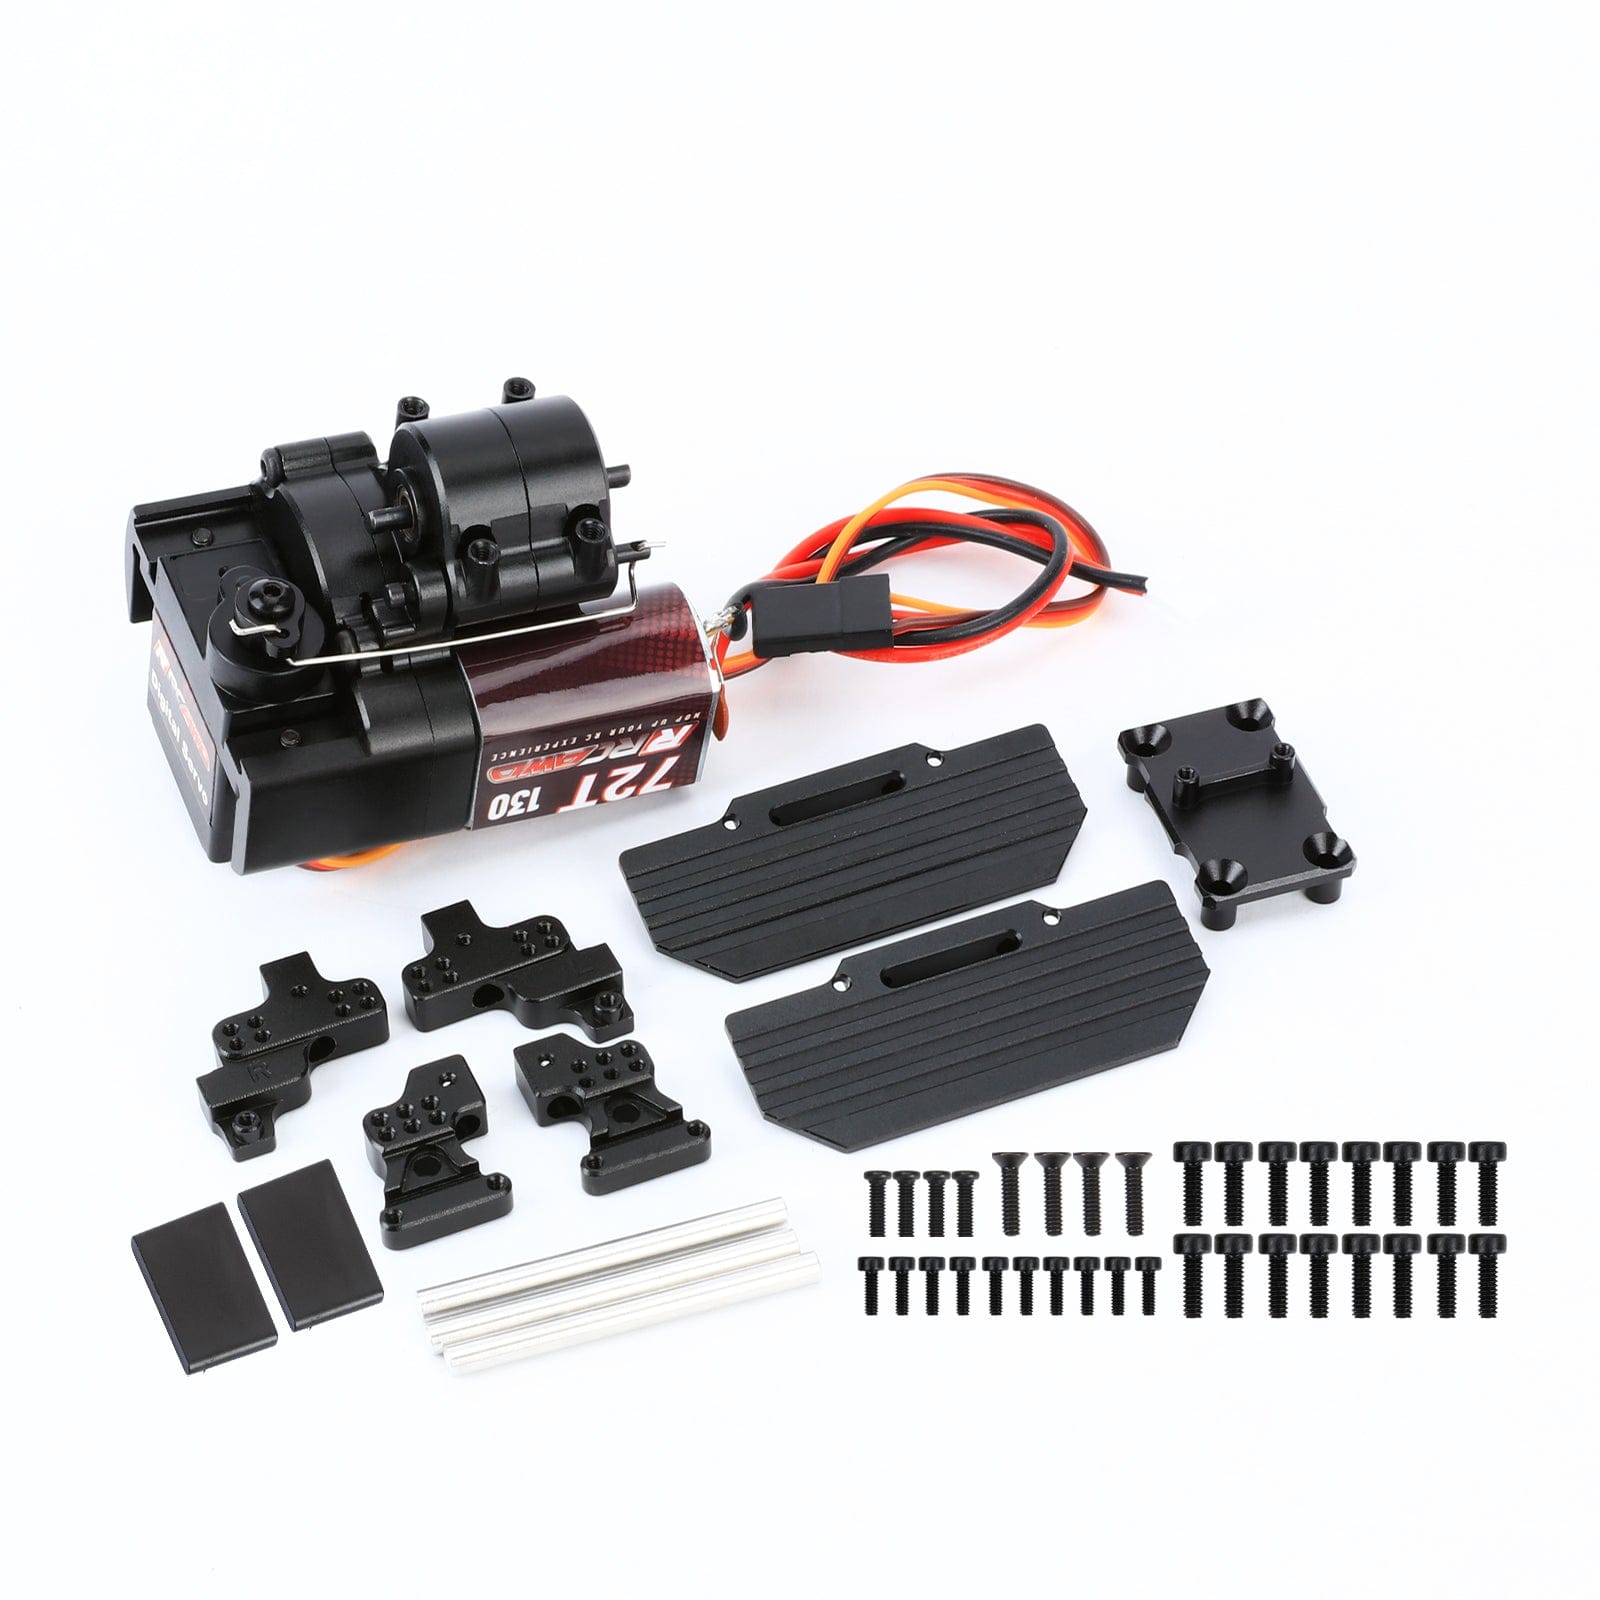 RCAWD AXIAL SCX24 Black / A Full Set RCAWD Axial SCX24 Upgrades 72T 130 Motor with 2 speed Transmission Gearbox and Mounts Set